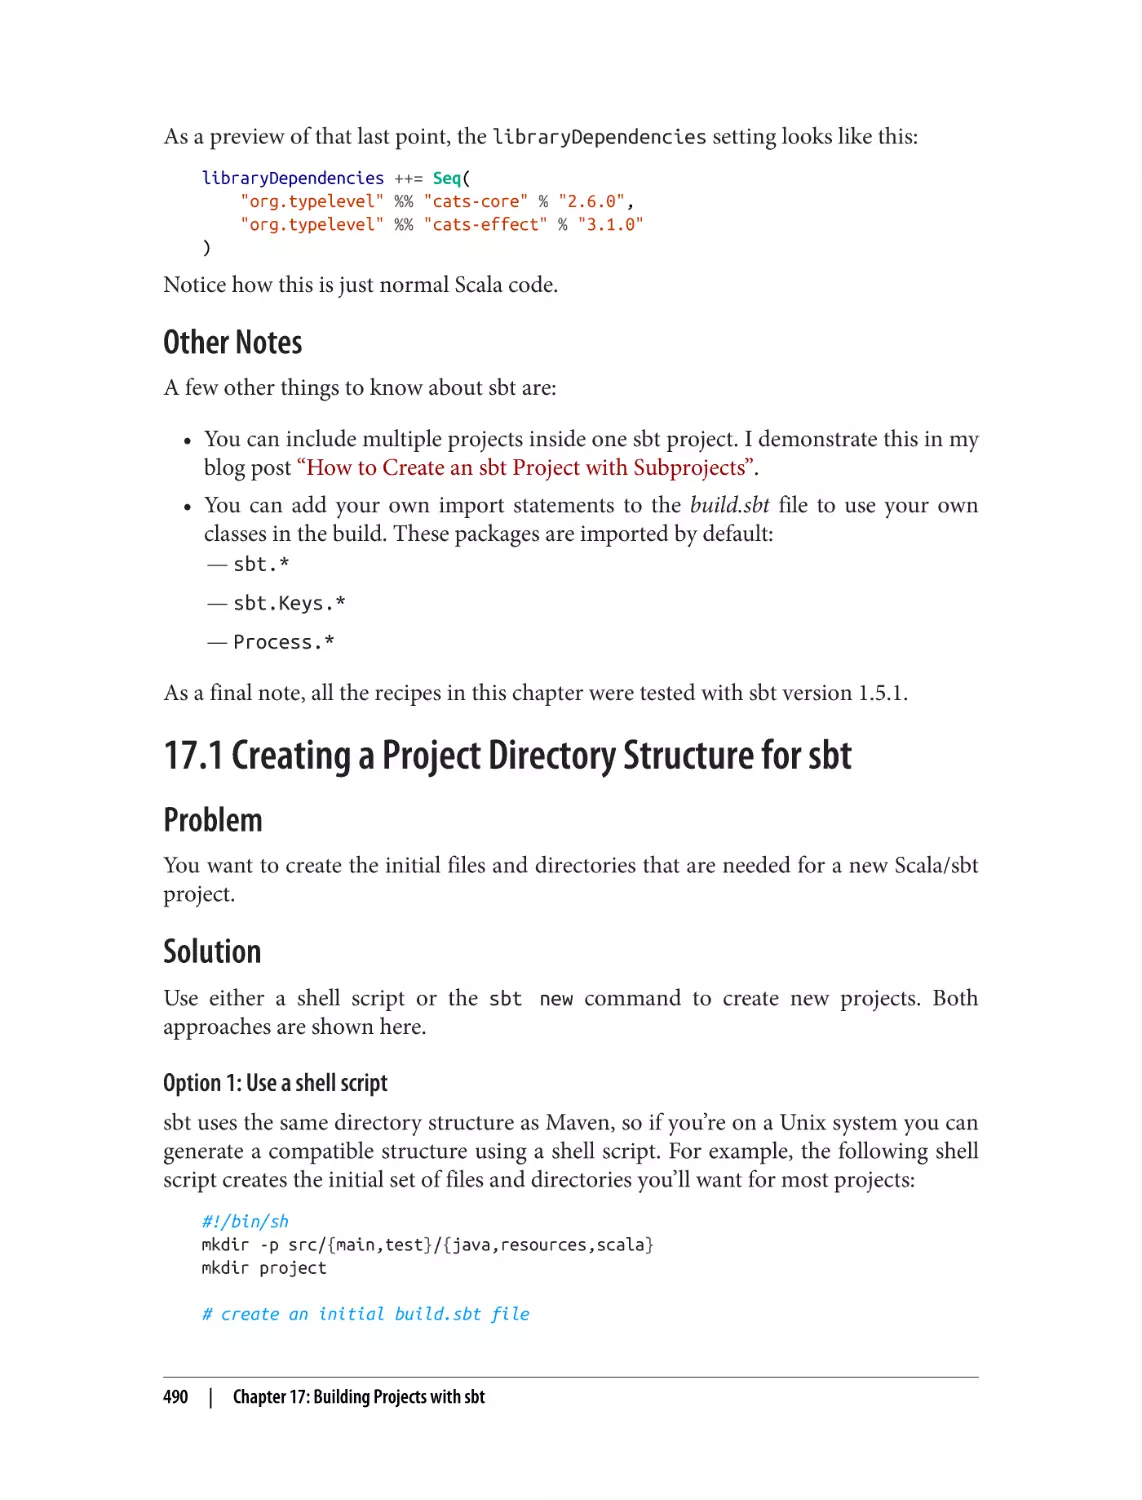 17.1 Creating a Project Directory Structure for sbt
Problem
Solution